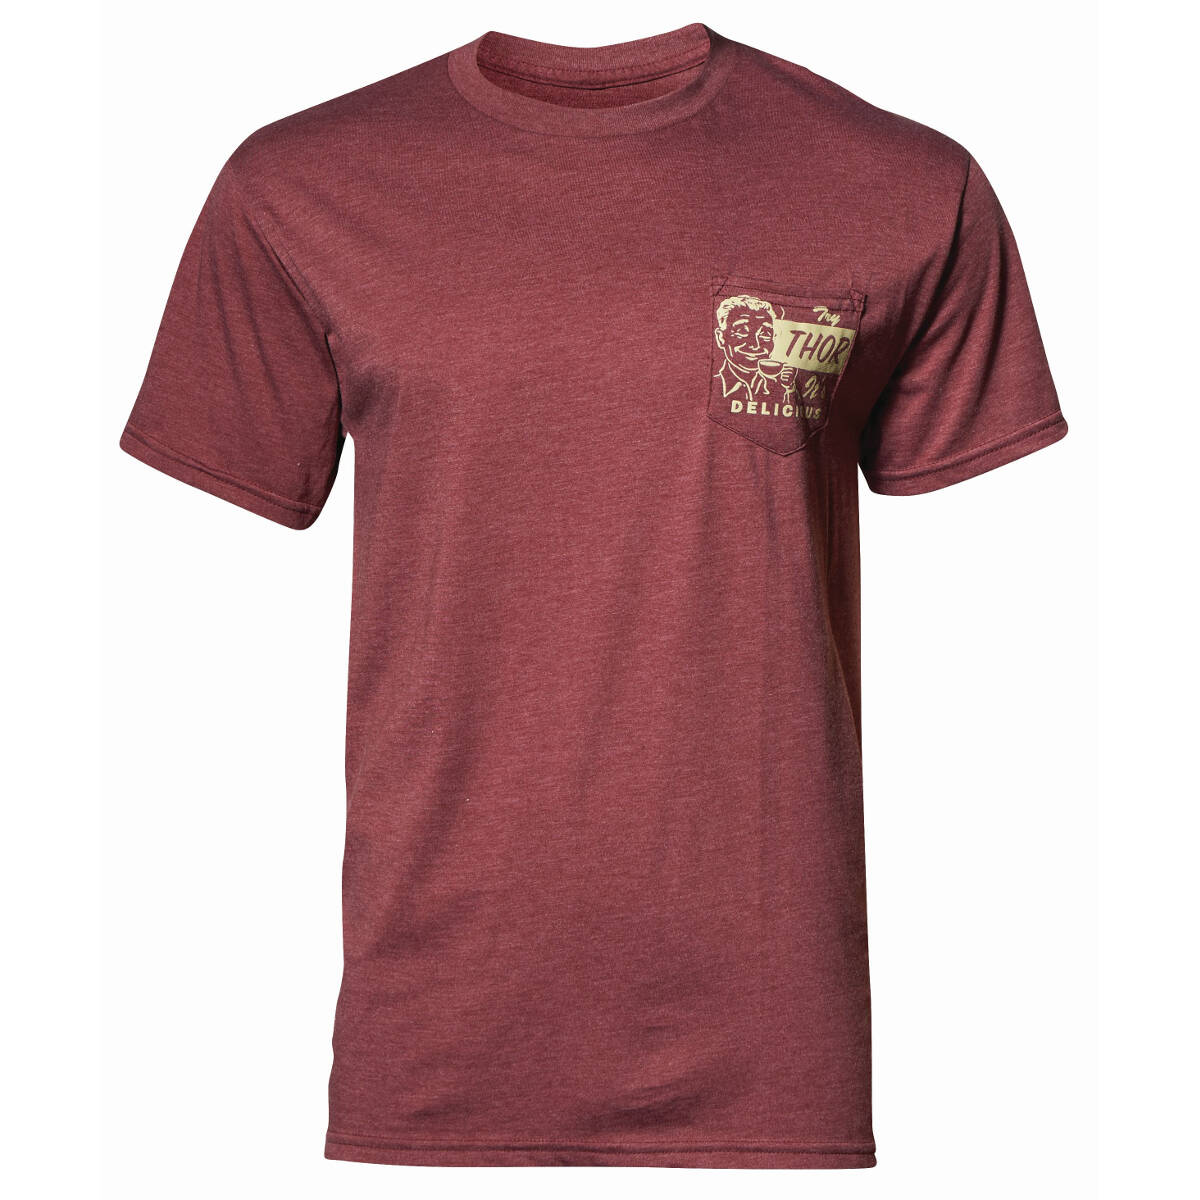 Thor T-Shirt Delicious Burgundy Heather